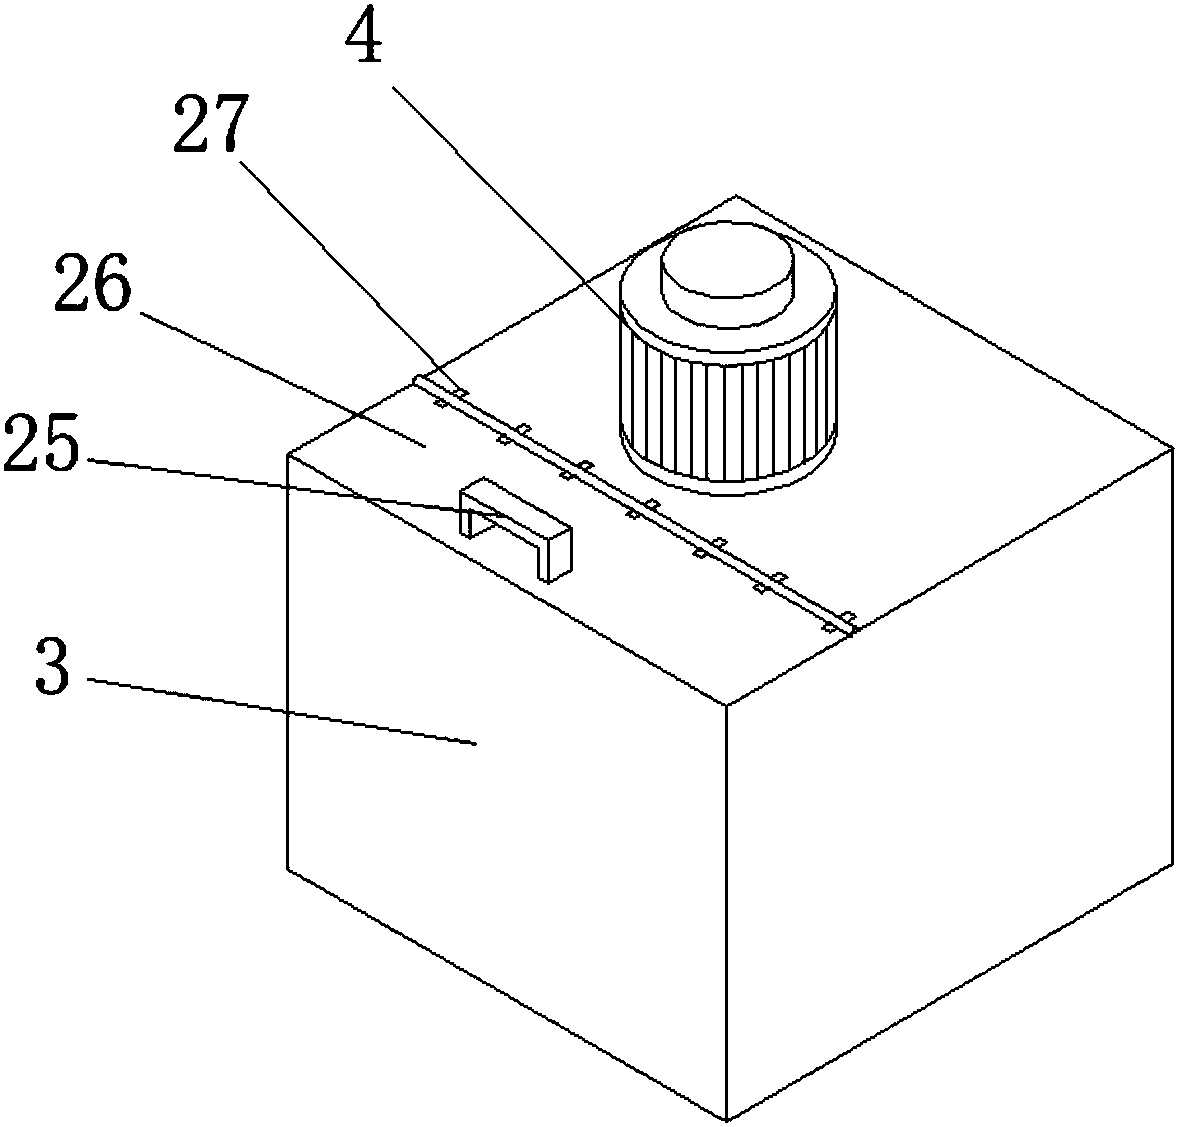 Fertilizing device for agricultural use